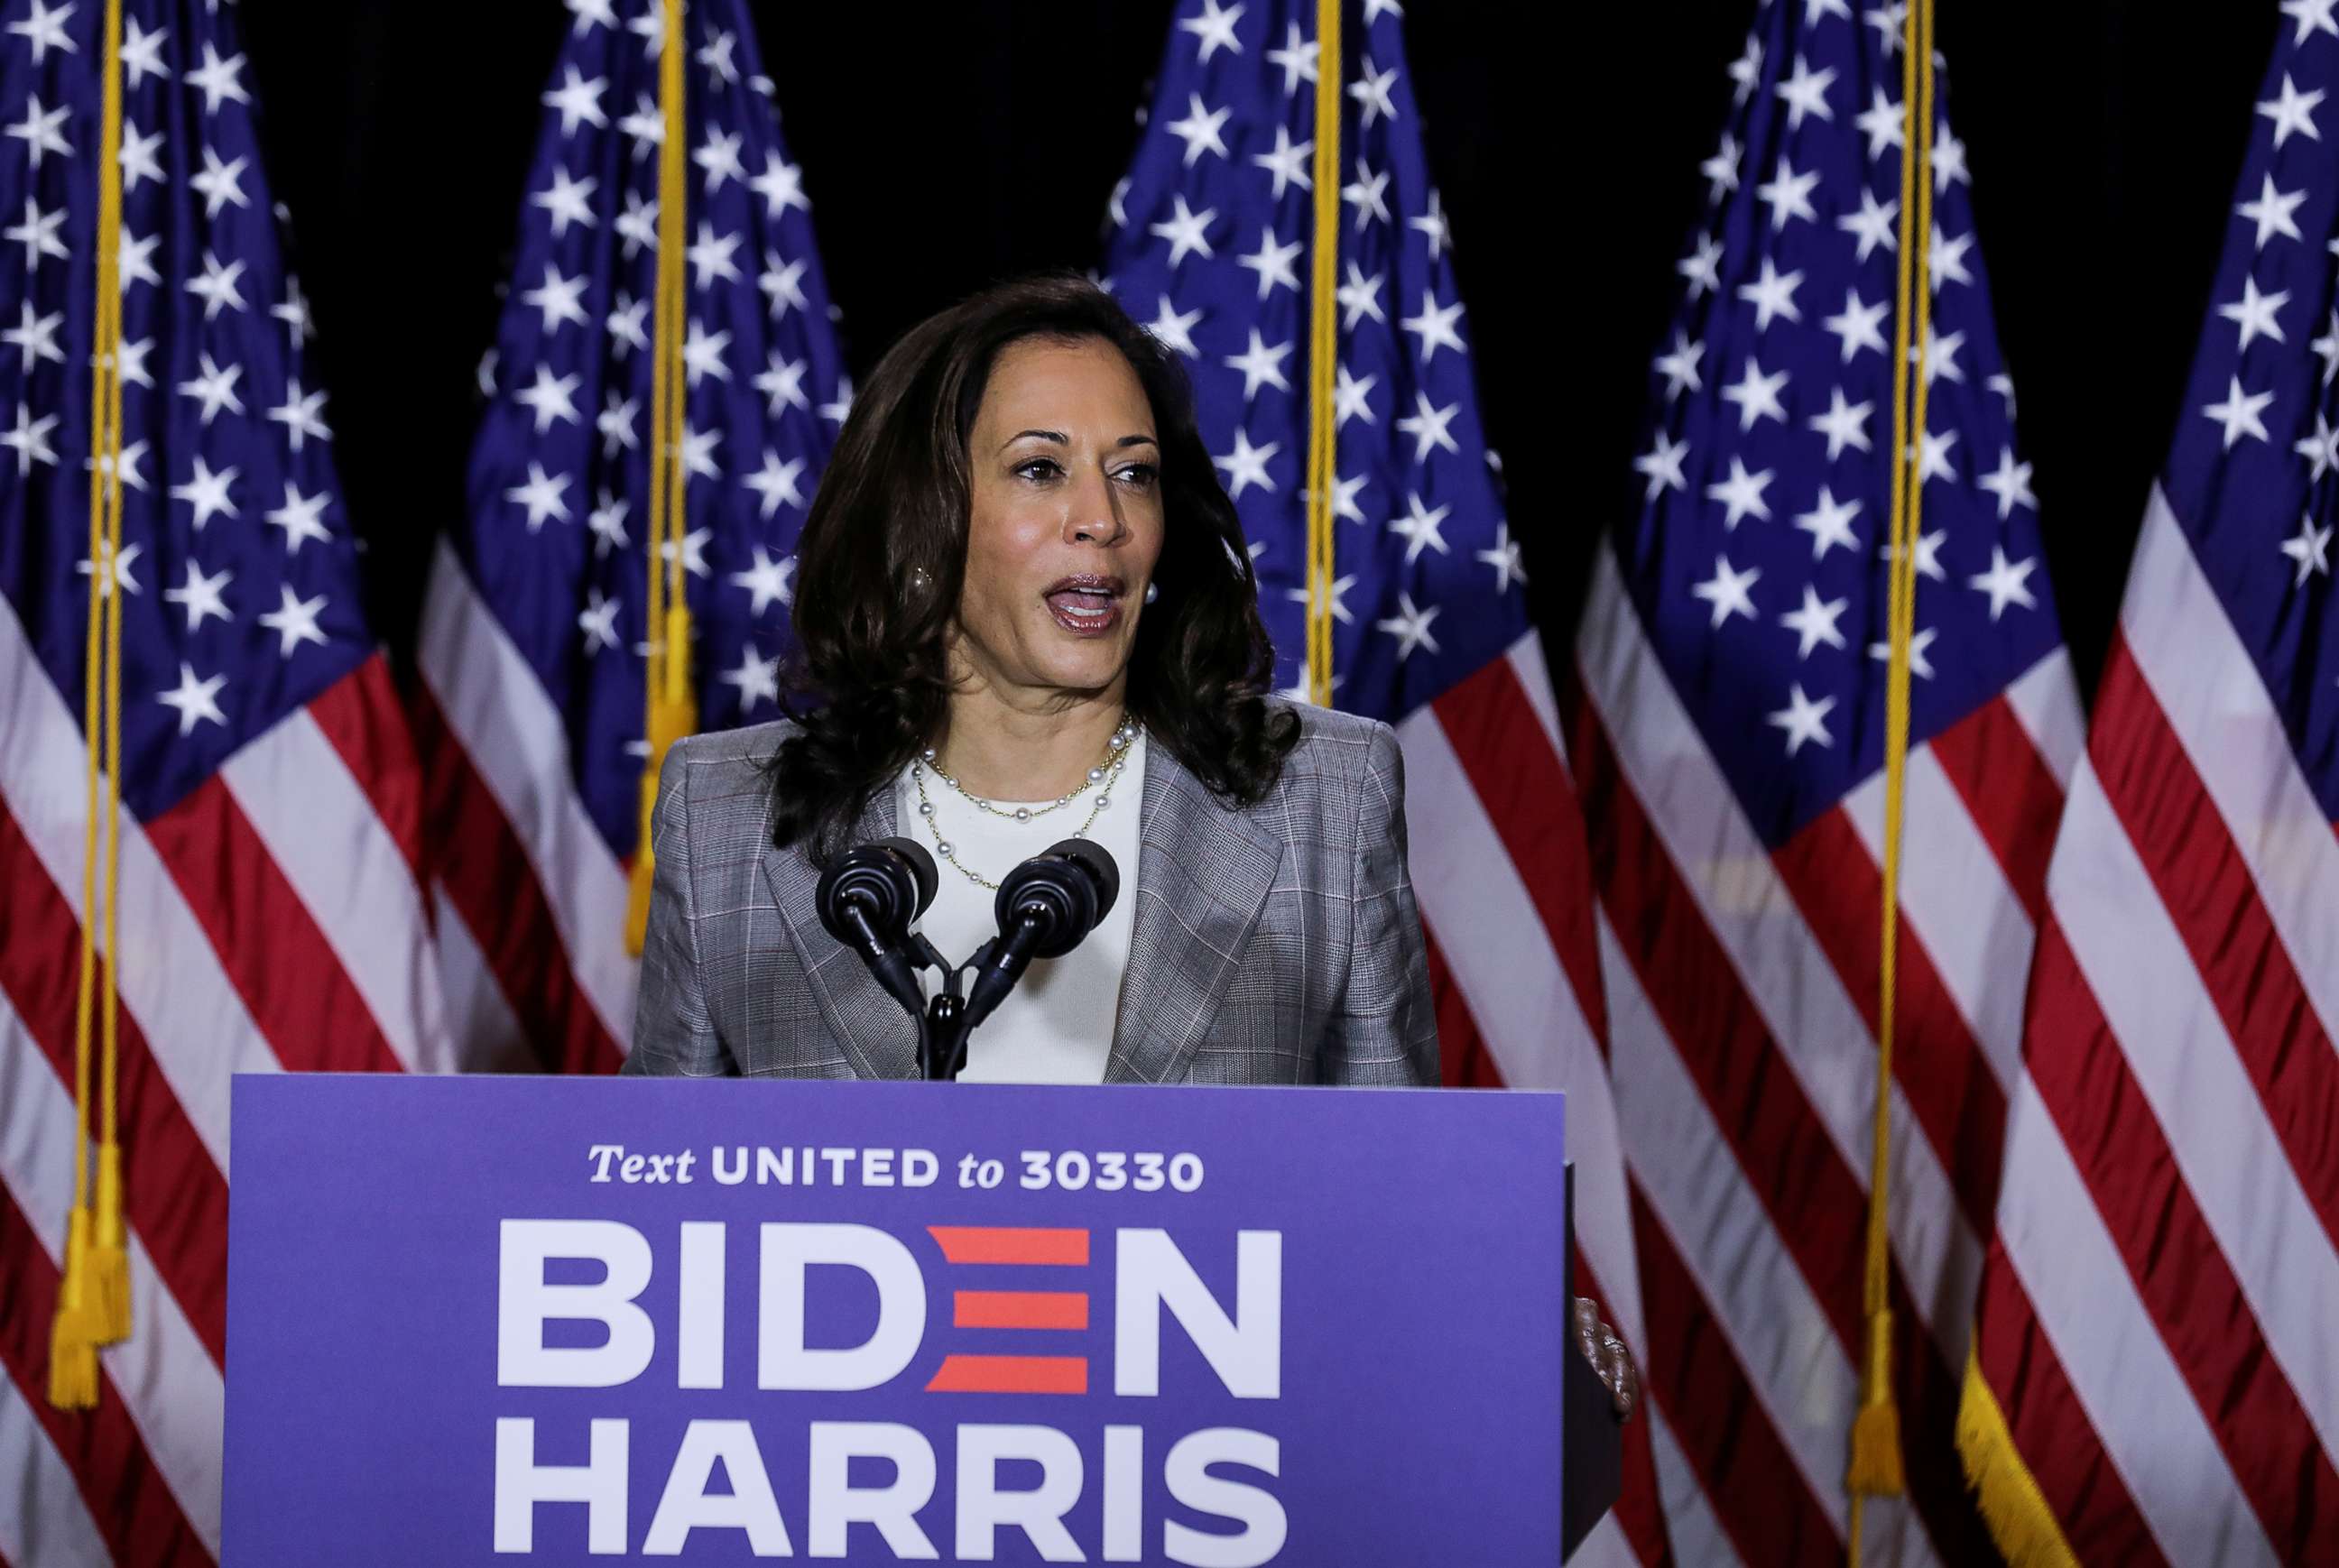 PHOTO: Democratic Vice Presidential candidate Kamala Harris speaks to reporters after receiving a briefing on the COVID-19 pandemic from public health experts during a campaign event in Wilmington, Del., Aug. 13, 2020.